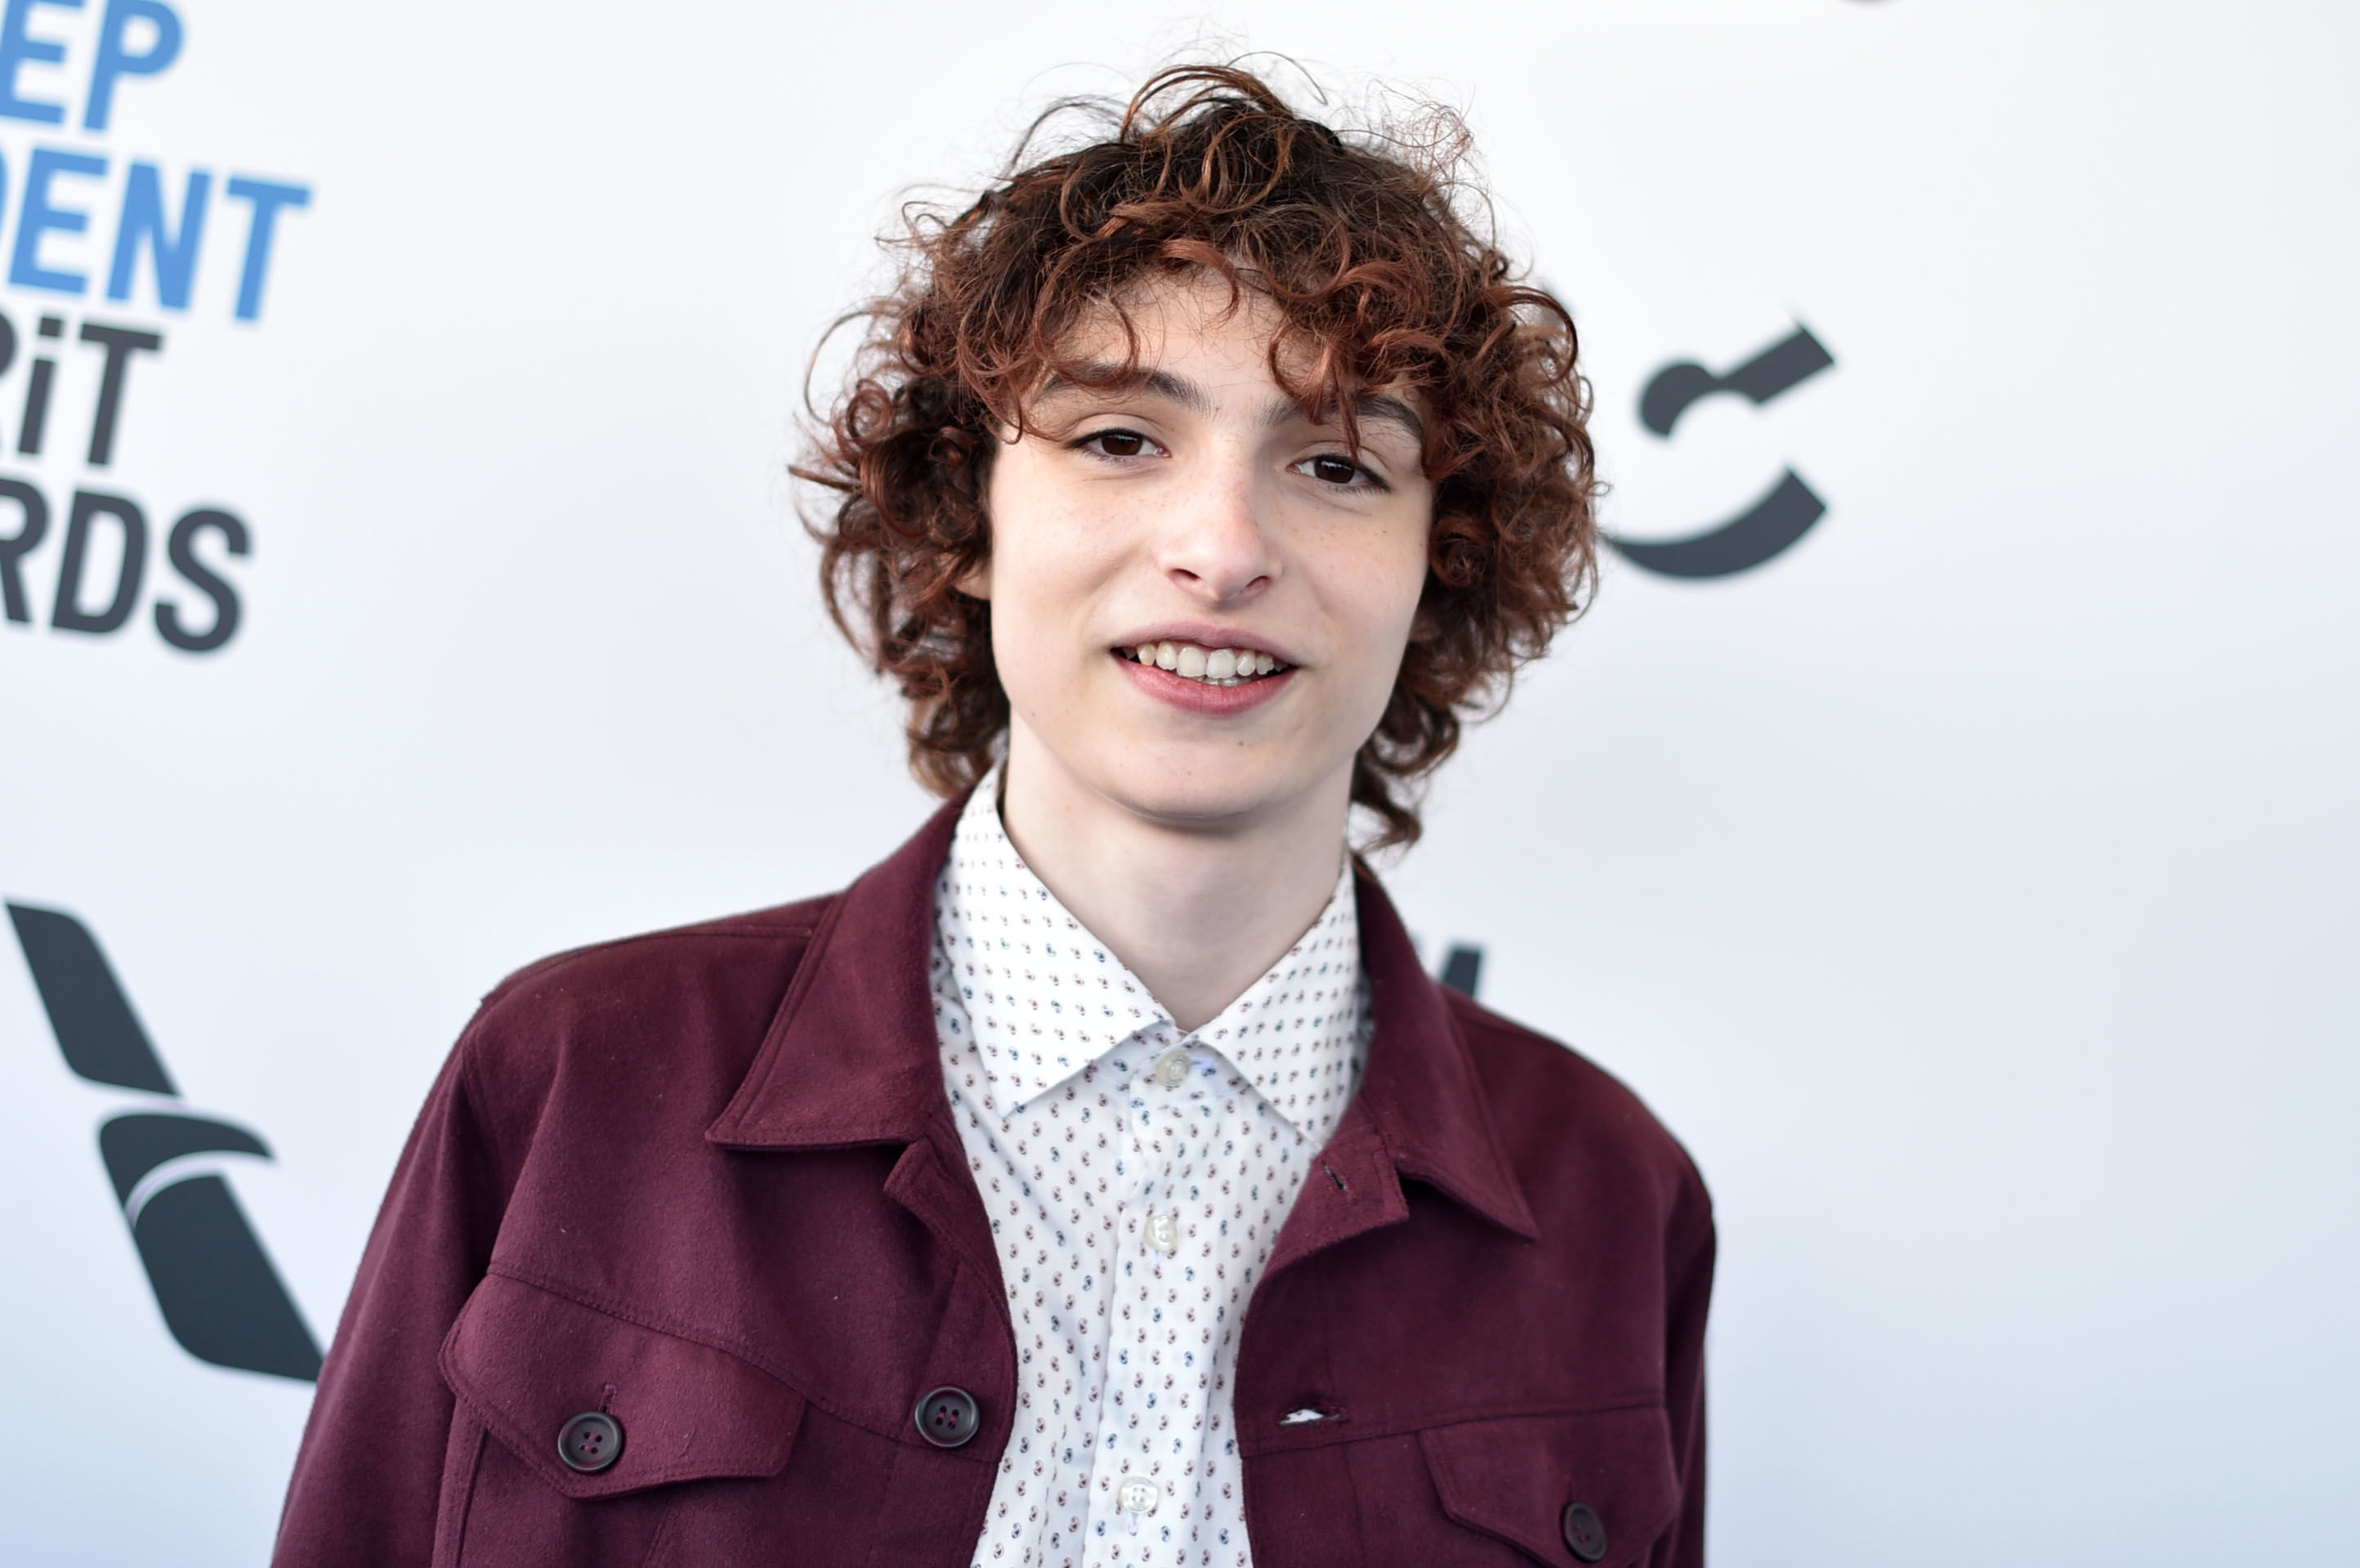 Spooky casting: Ghostbusters possesses Finn Wolfhard and Set